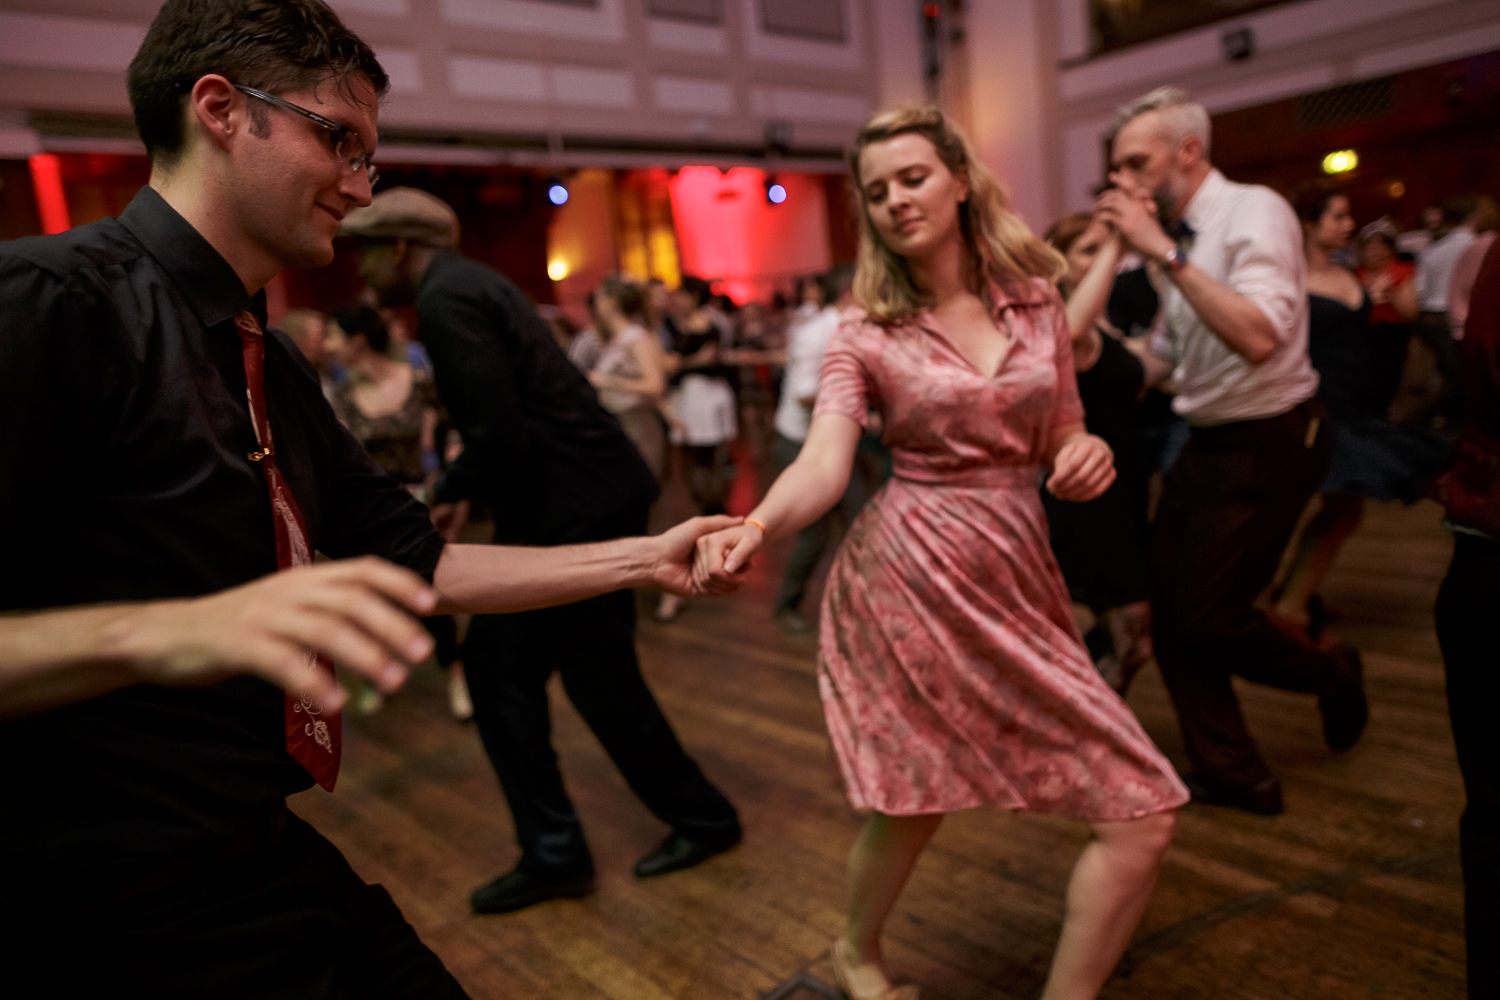  The London Swing Festival 2015 - Saturday Night. Photo Credit: For Dancers Only (http://d.pr/1fEEY) - http://www.ebobrie.com/london-swing-festival-2015/ 